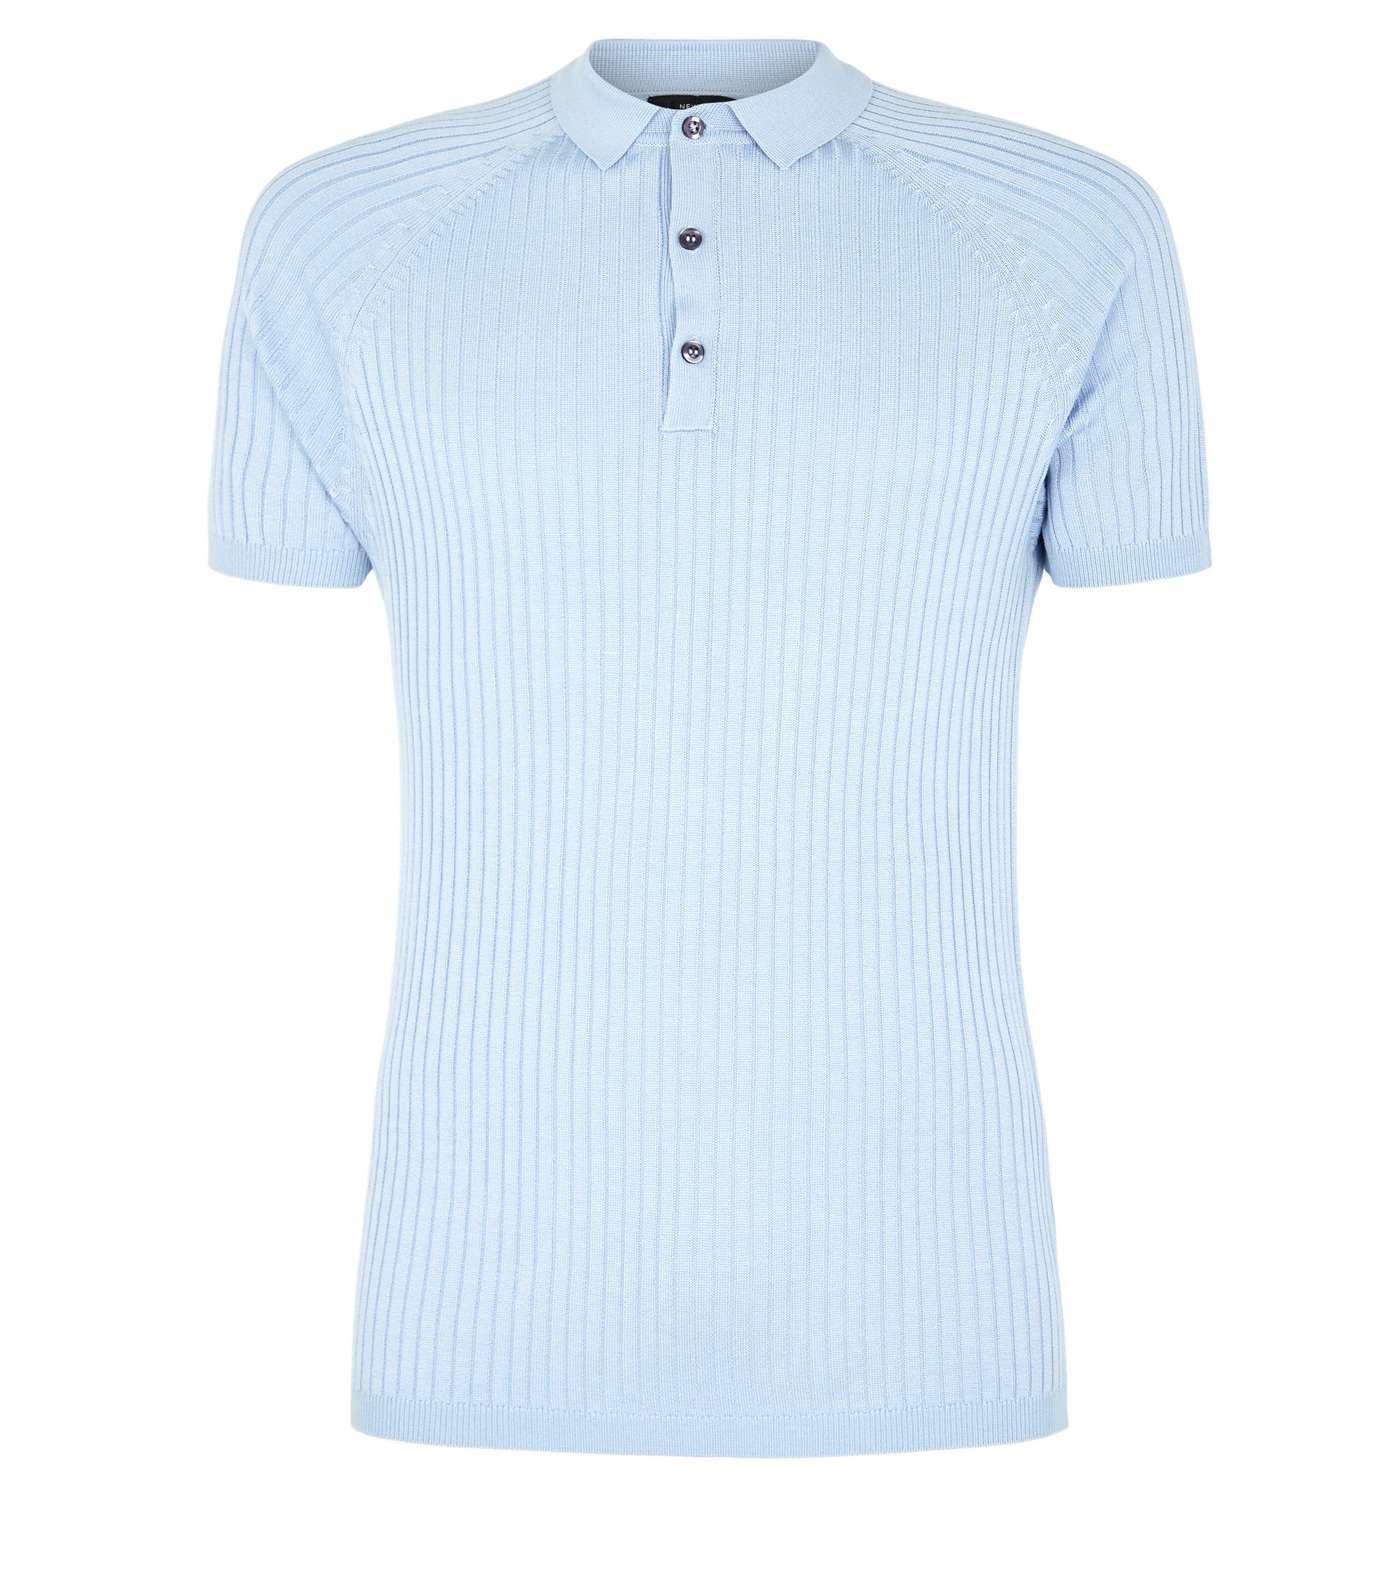 Pale Blue Knit Muscle Fit Polo Shirt Image 4